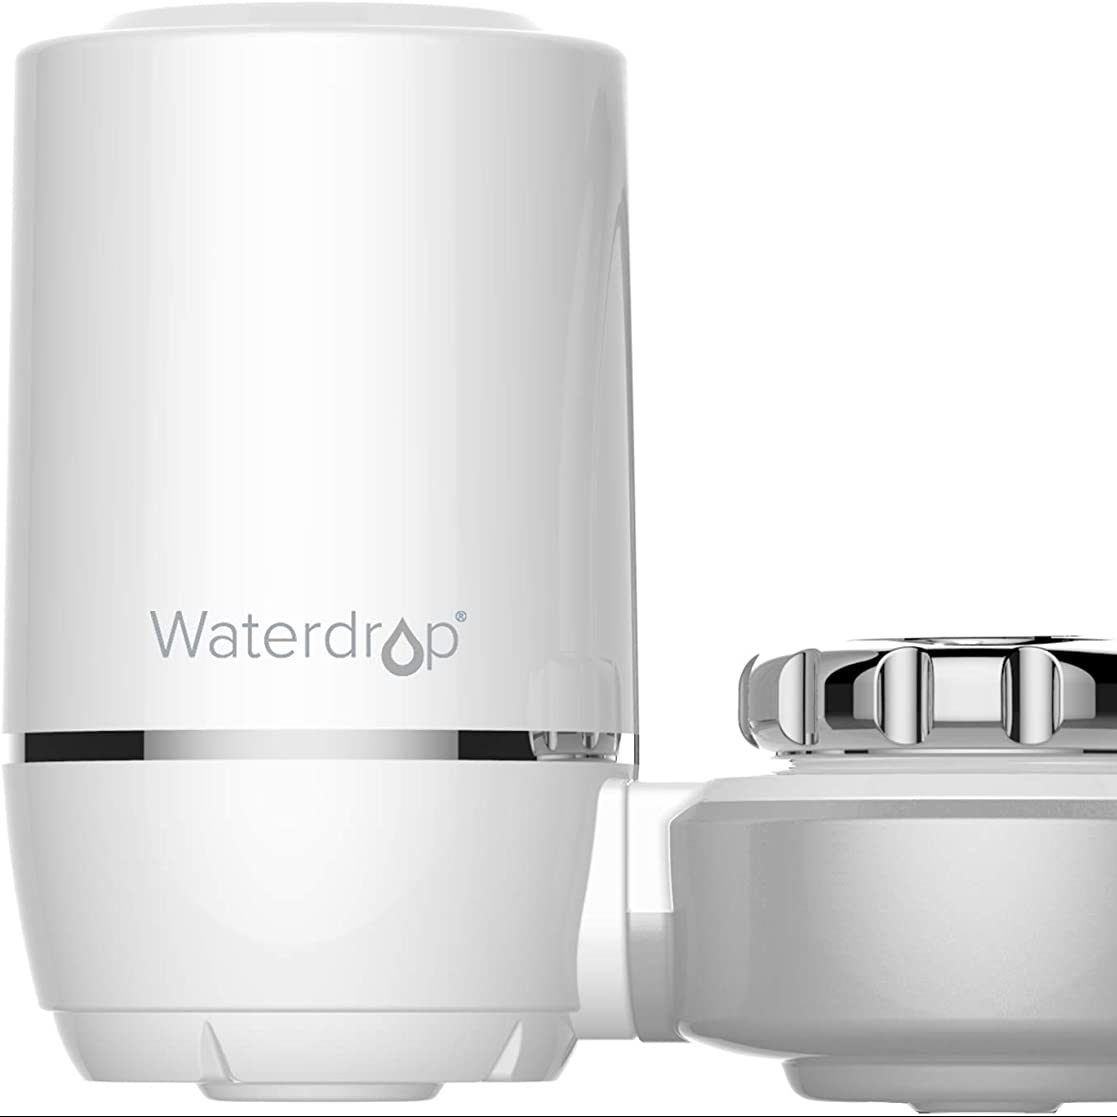 Waterdrop Water Faucet Filtration System